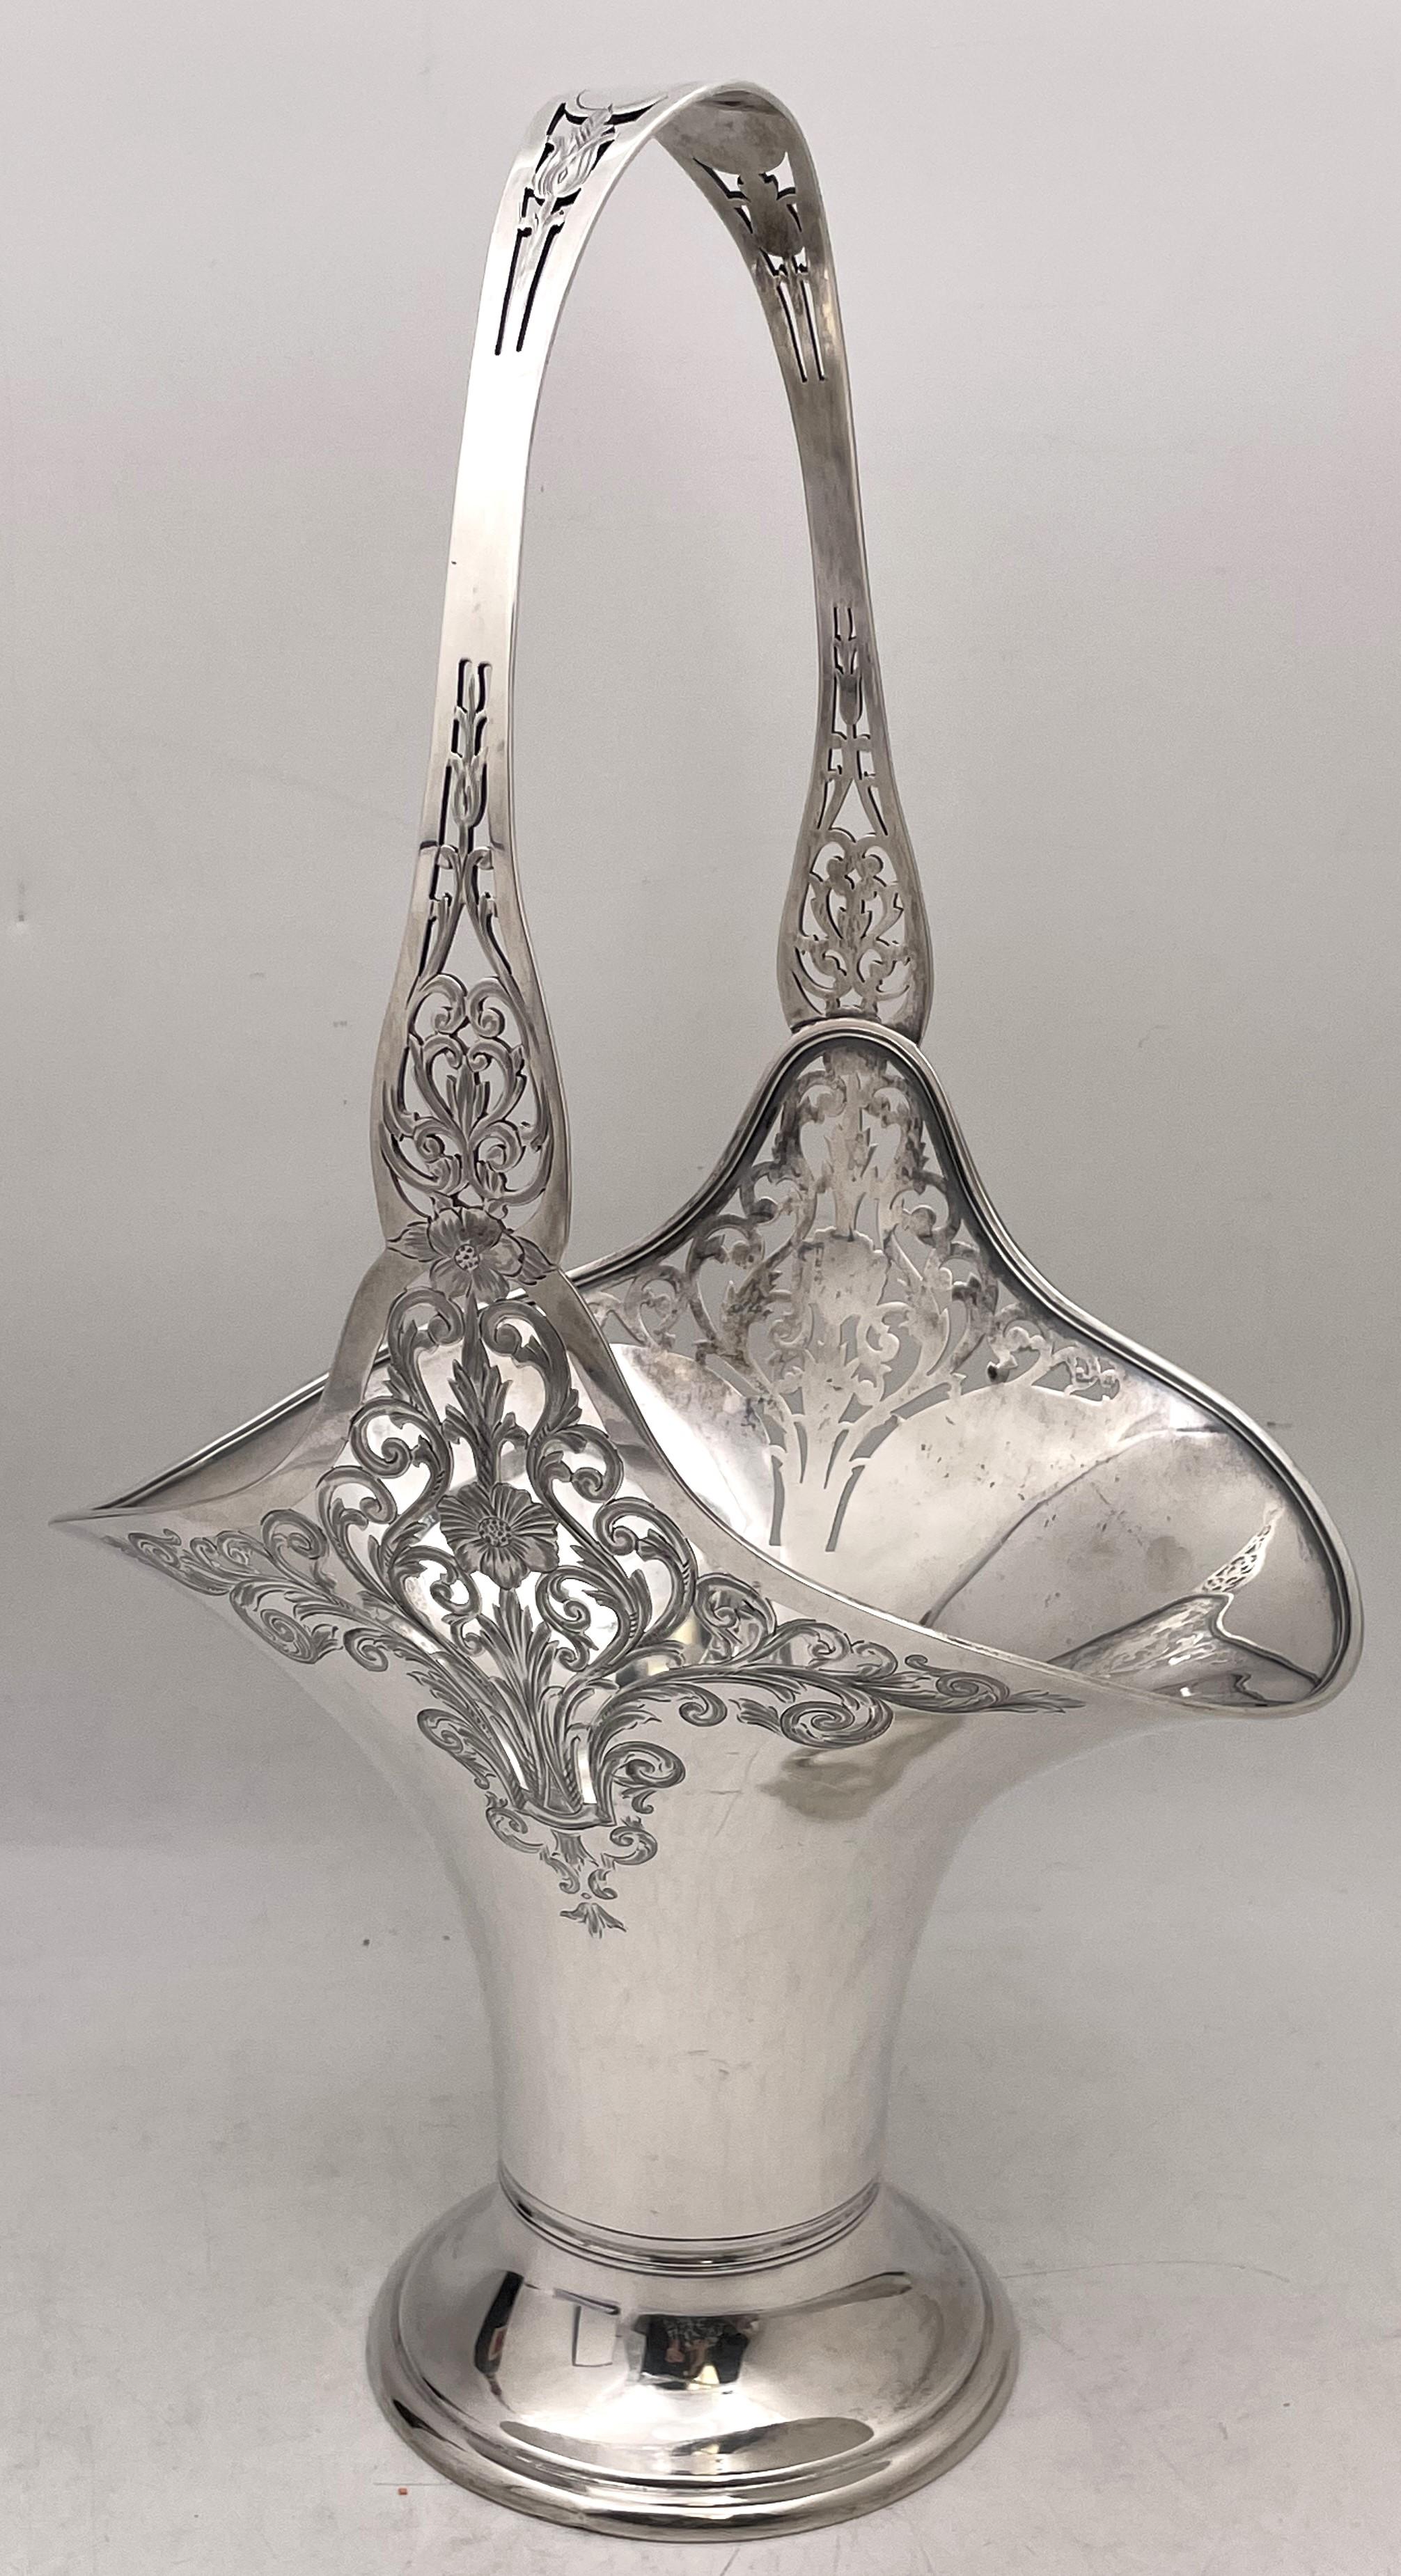 Gorham sterling silver basket or bowl in pattern number 2340A from 1915 in Art Nouveau style with pierced and finely engraved floral and natural motifs adorning the body and handle. The basket measures 17 1/2'' in height by 10'' in depth by 5 1/4''